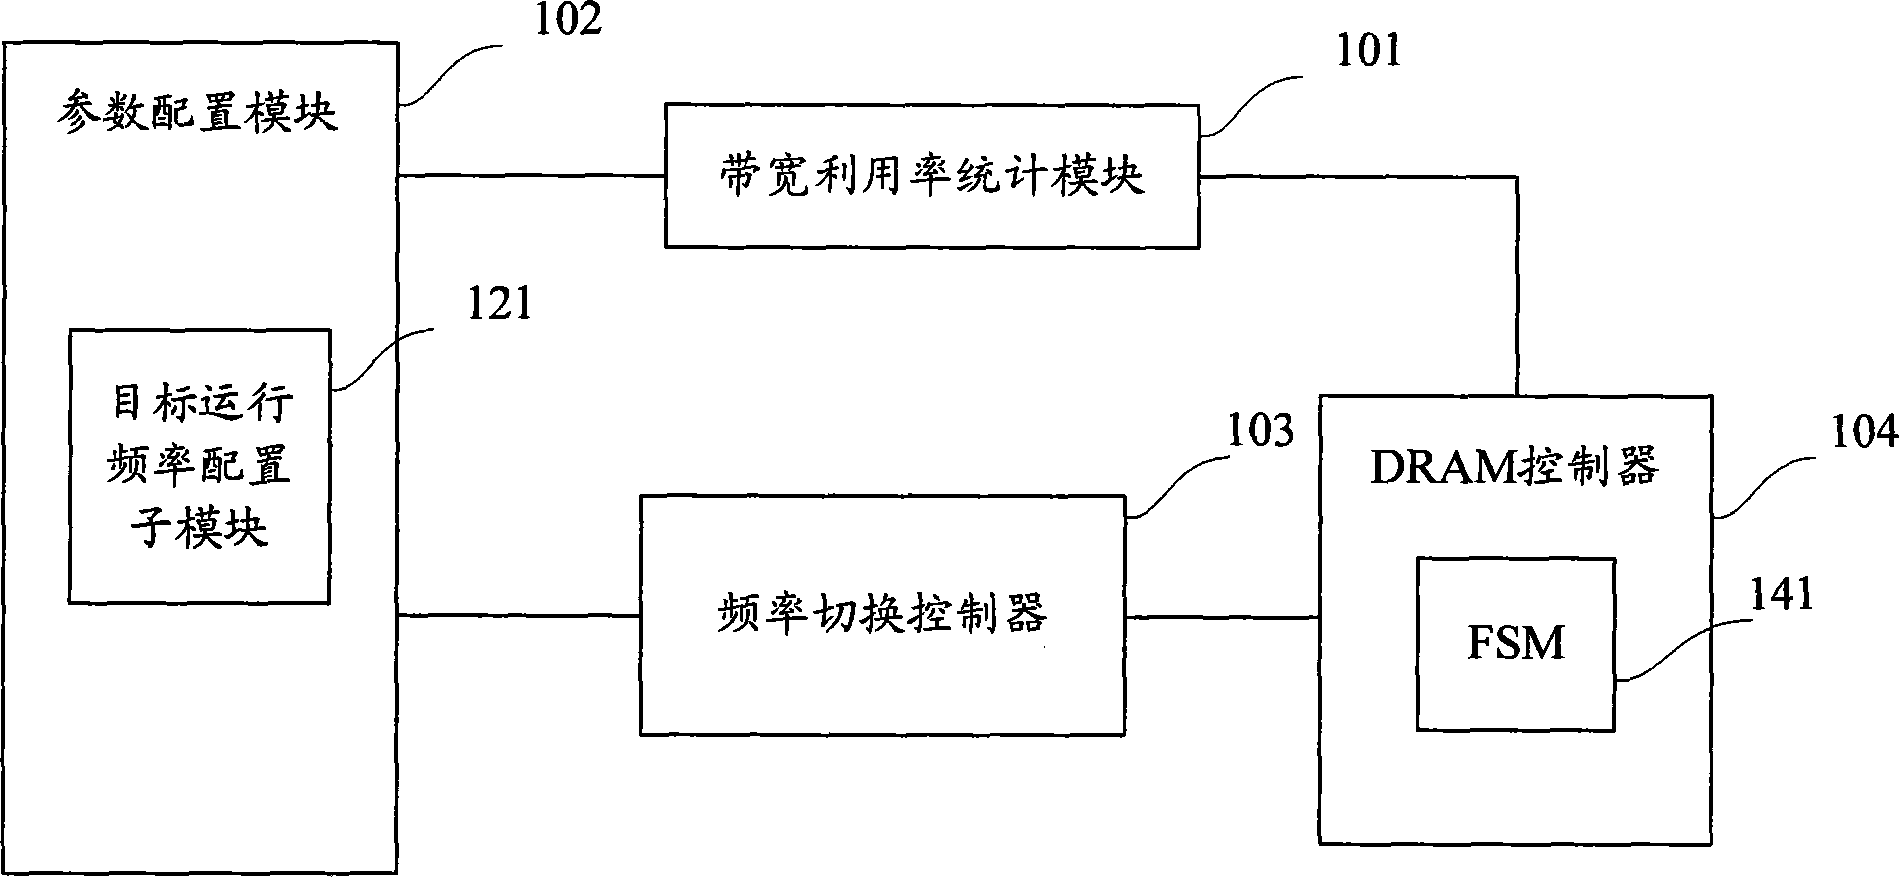 DRAM run frequency adjustment system and method